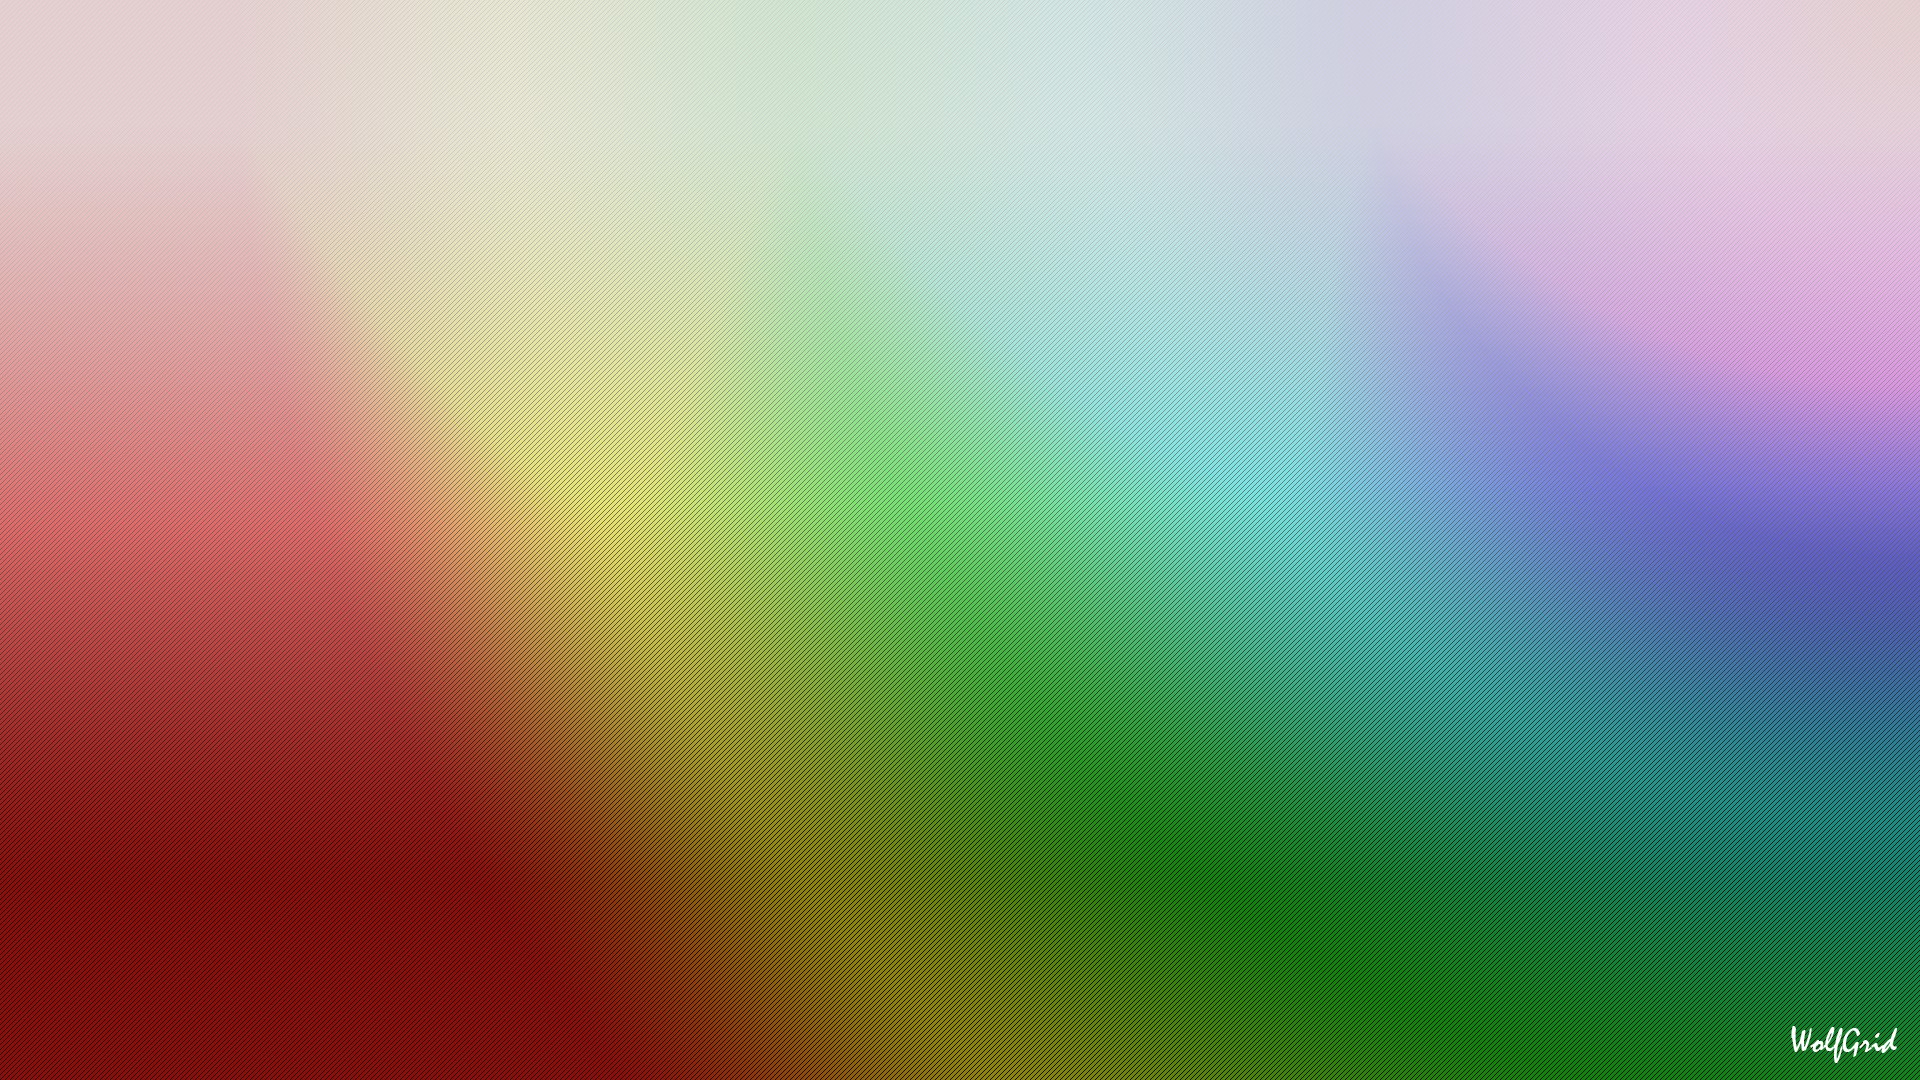 General 1920x1080 colorful abstract blurred gradient